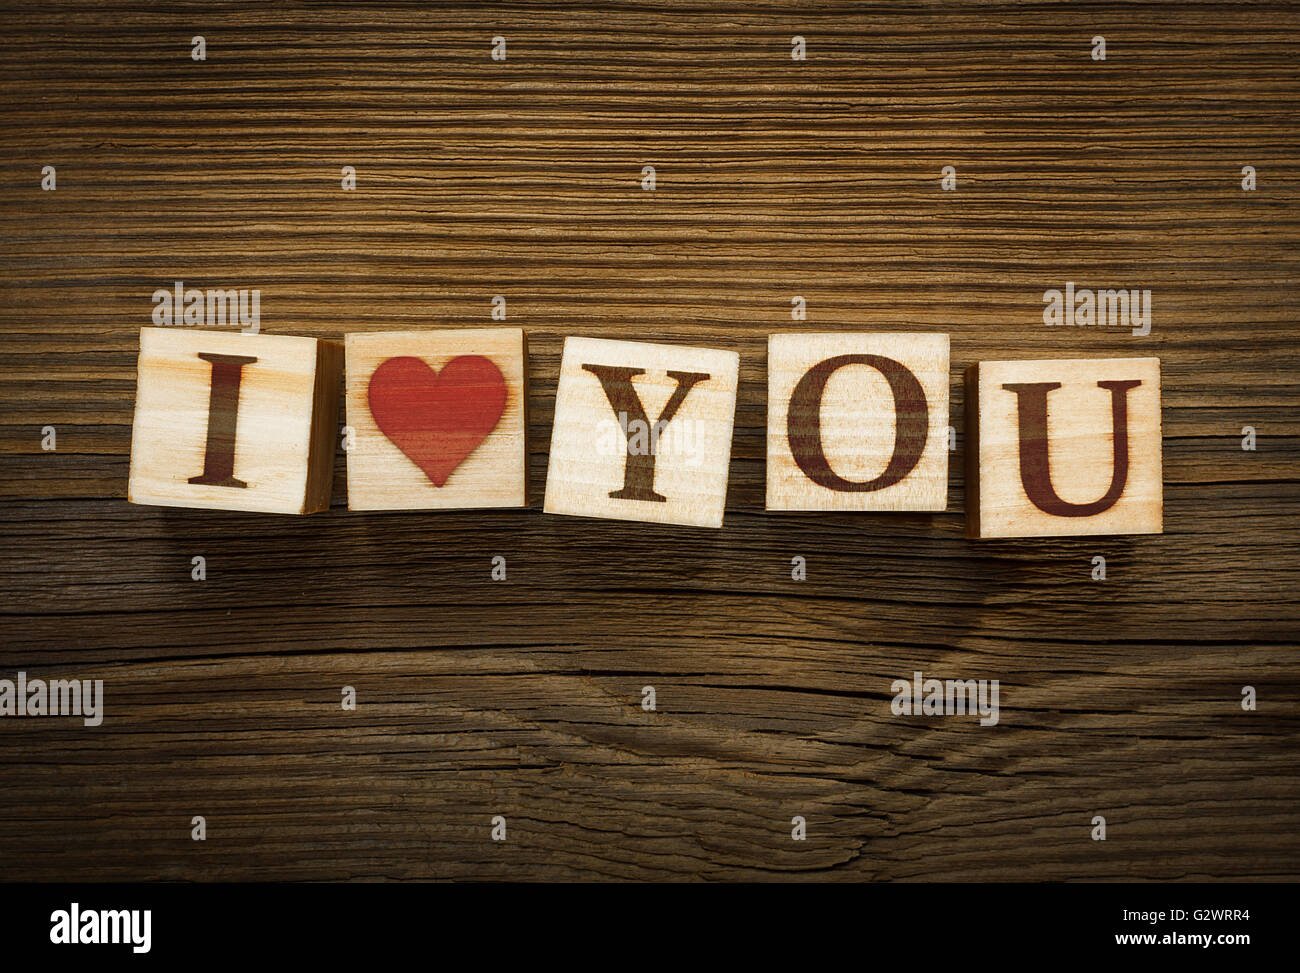 Message I LOVE YOU made of letters on wooden blocks Stock Photo